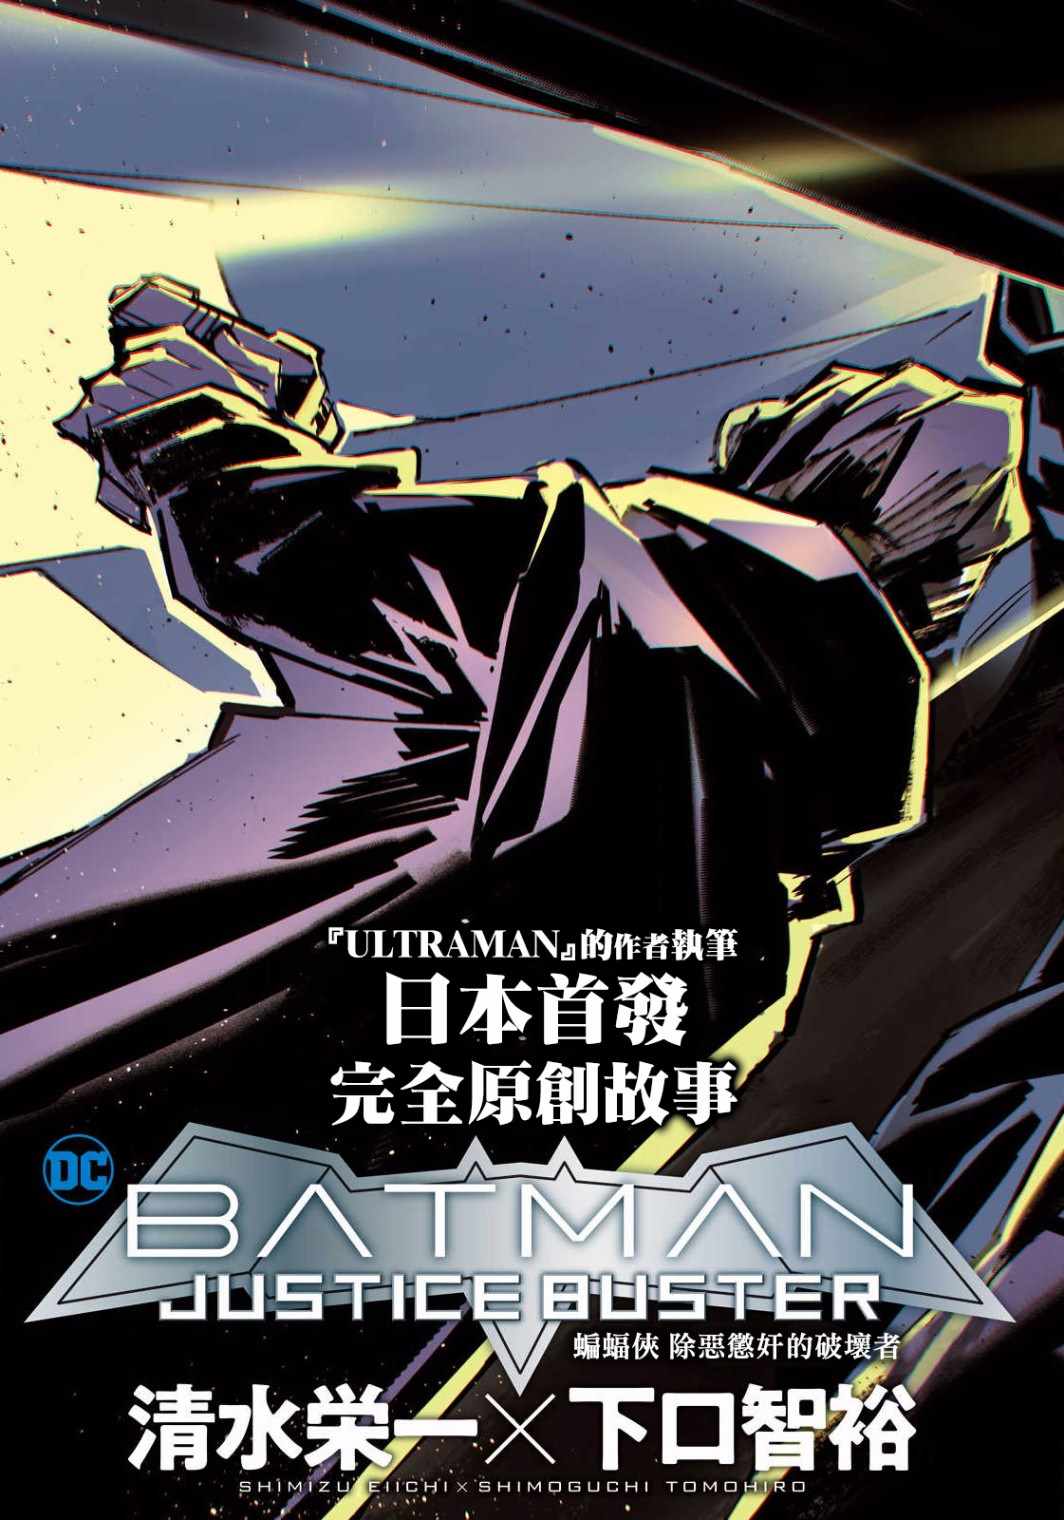 《BATMAN JUSTICE BUSTER》漫画 JUSTICE BUSTER 001集